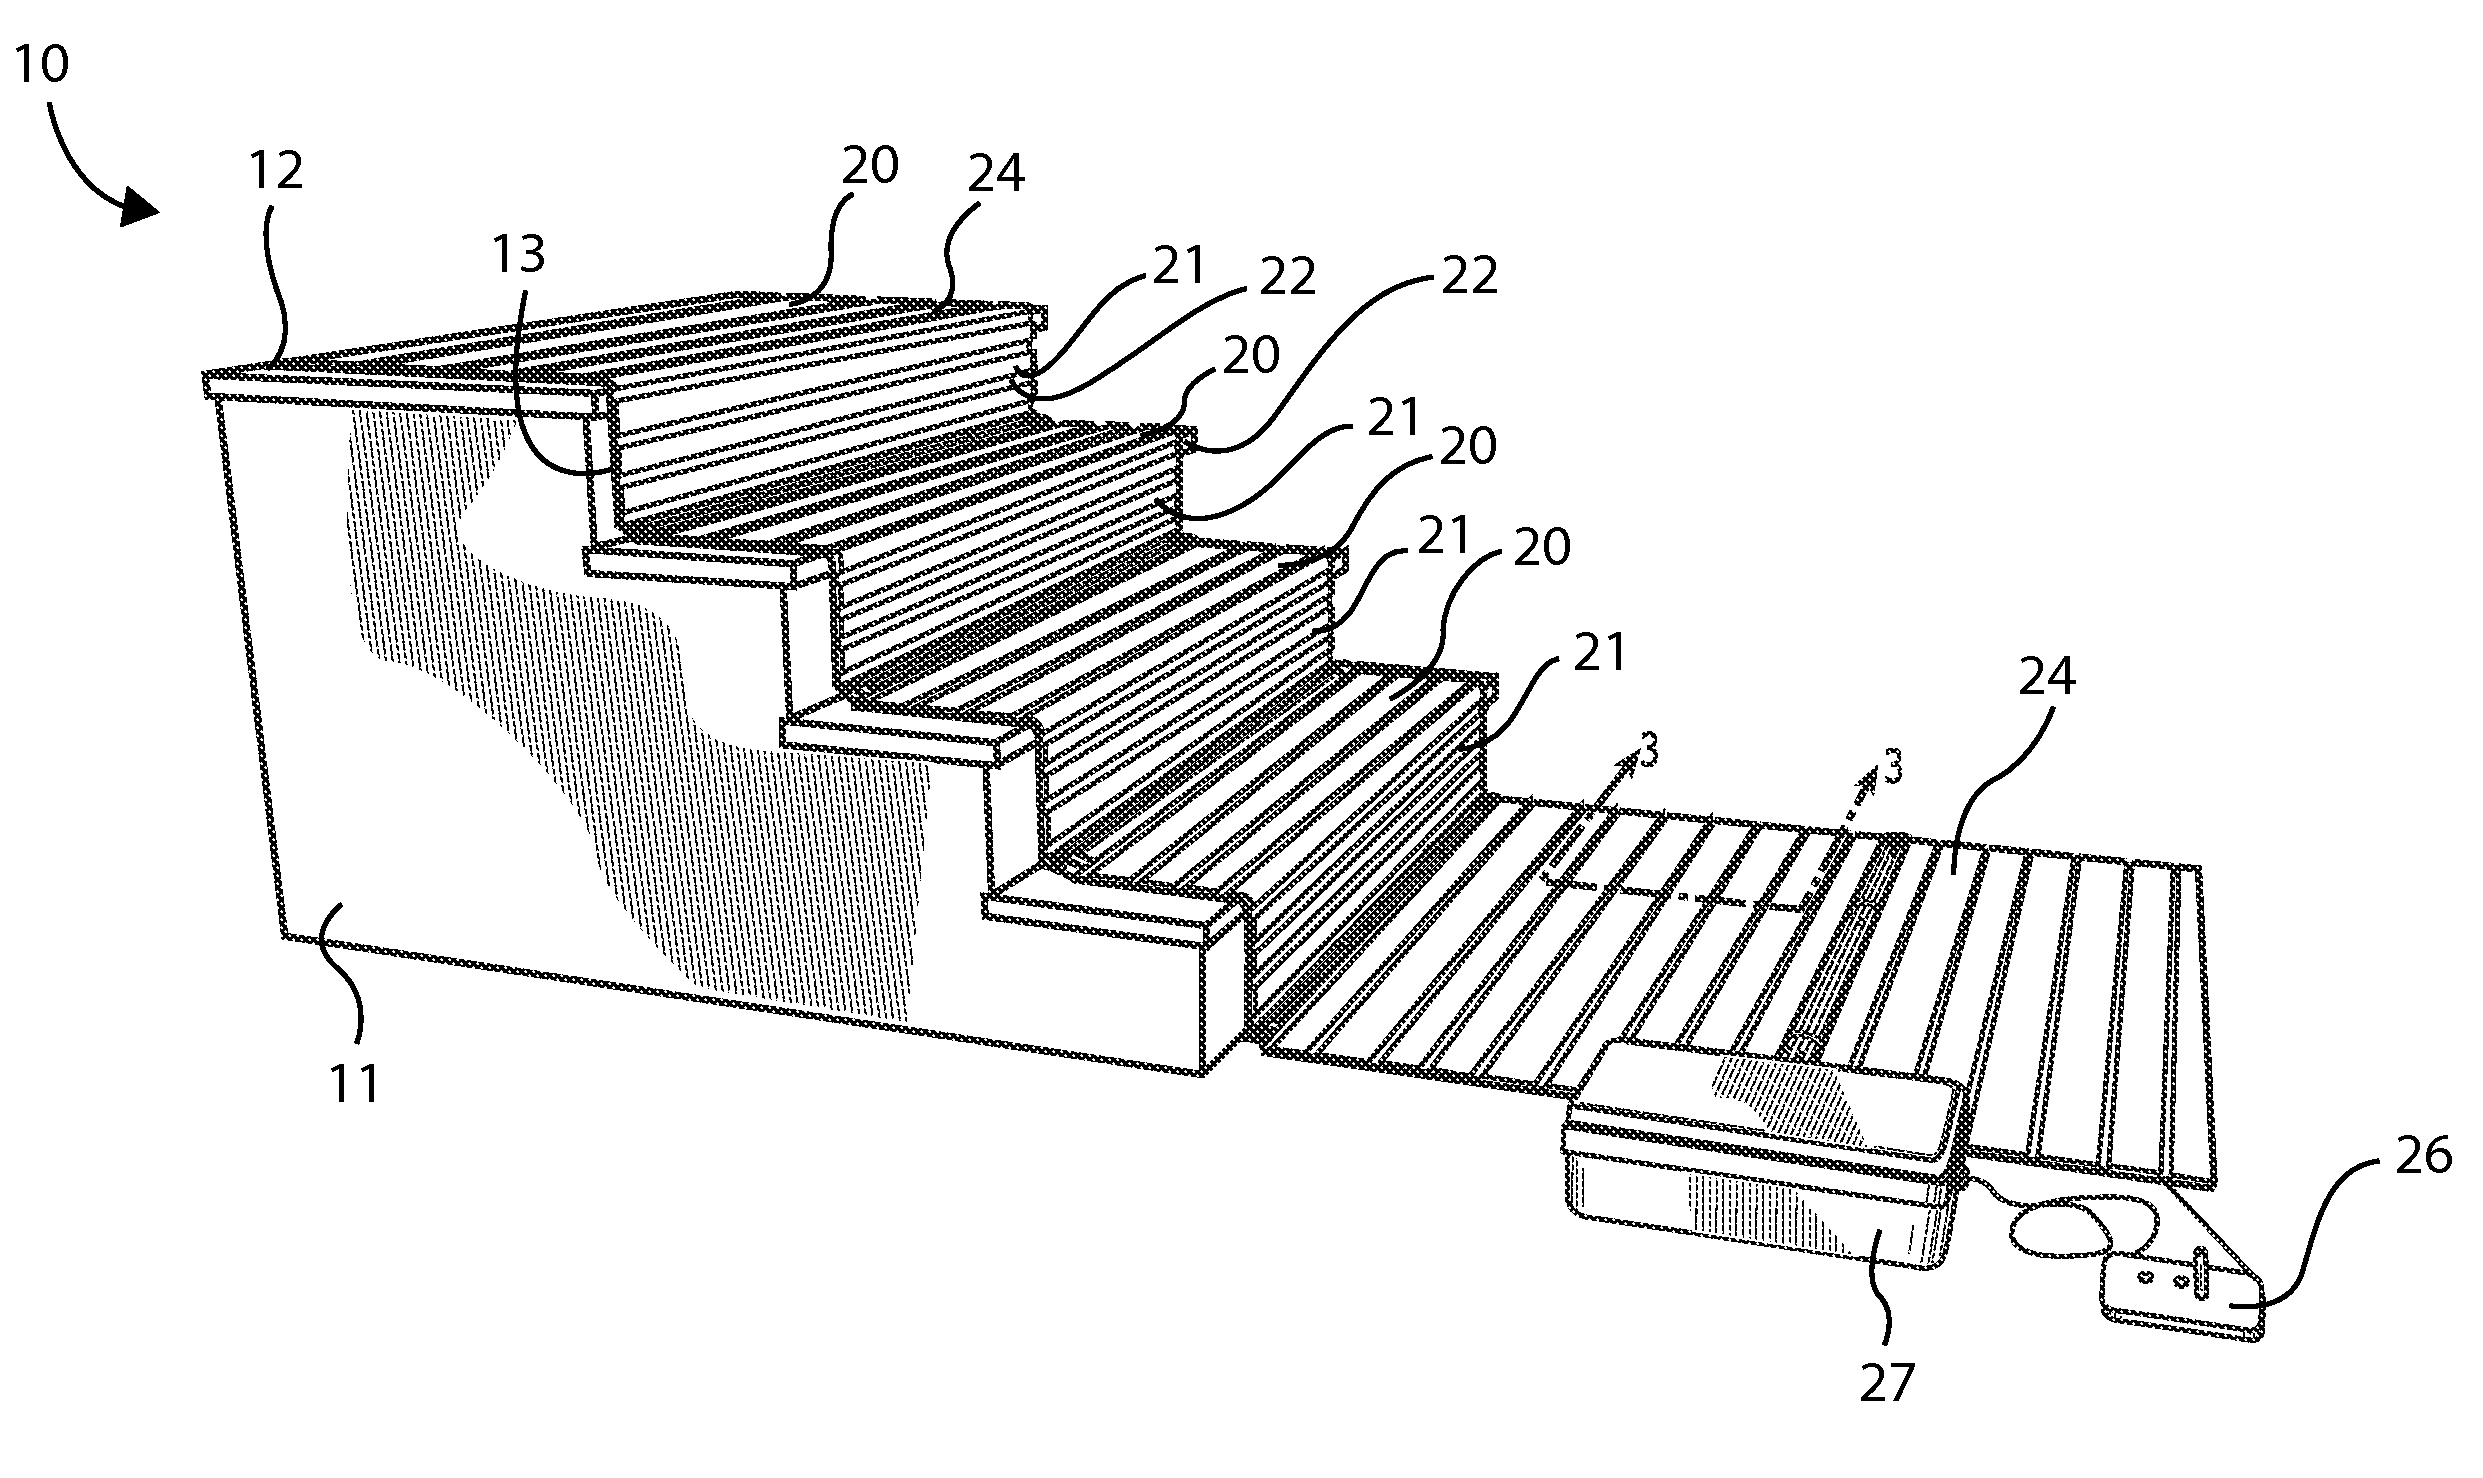 Heated floor mat for elevated surfaces and associated method